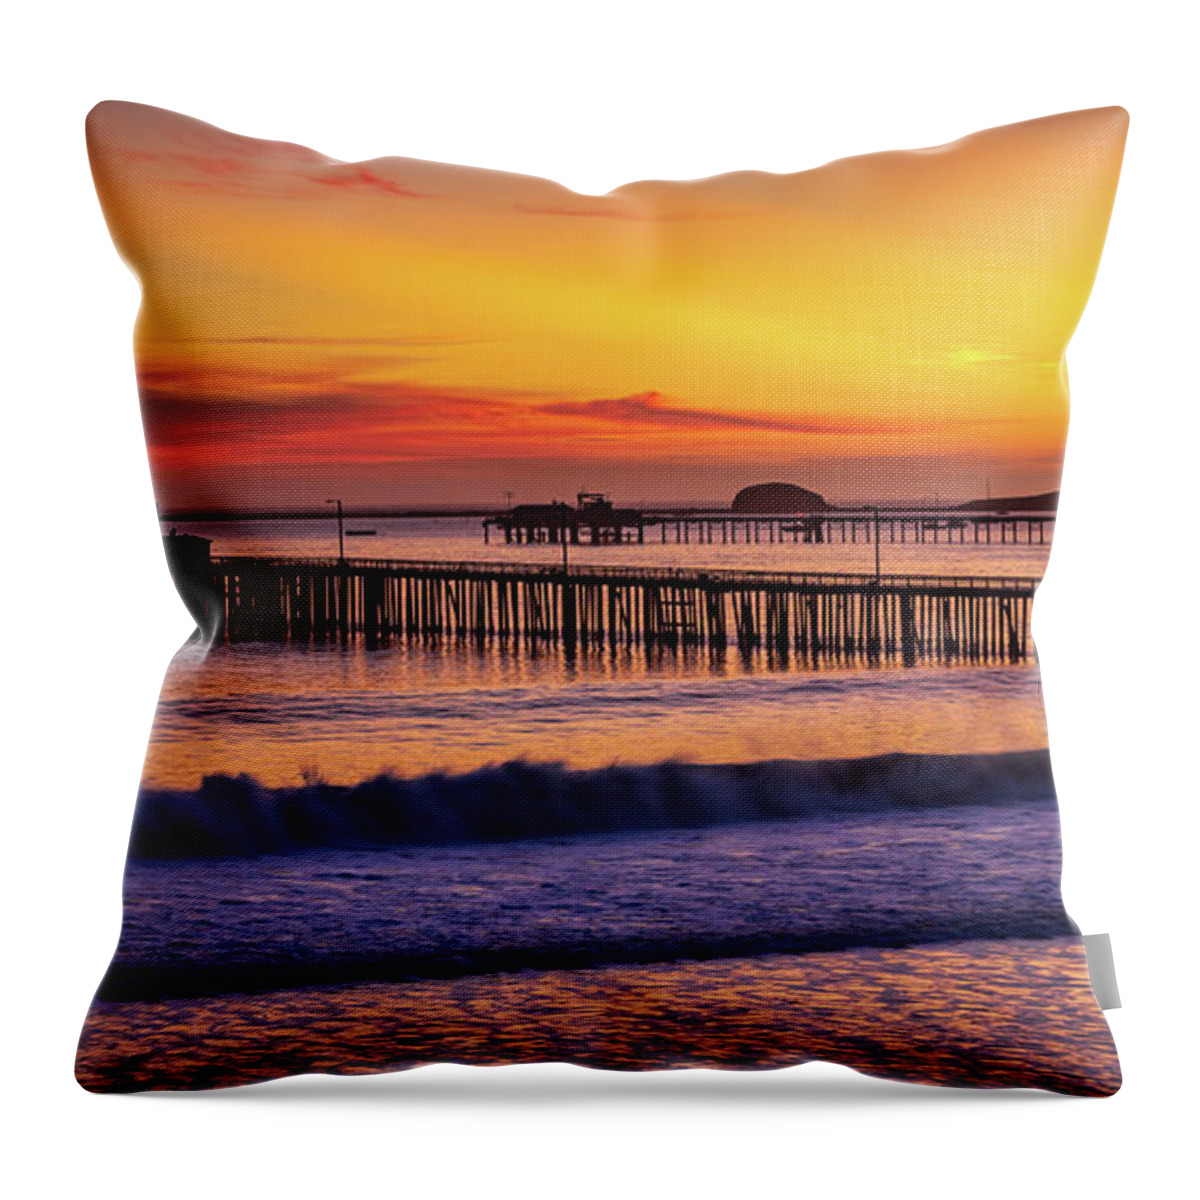 Sunset Throw Pillow featuring the photograph Avila Beach Pier At Sunset by Mimi Ditchie